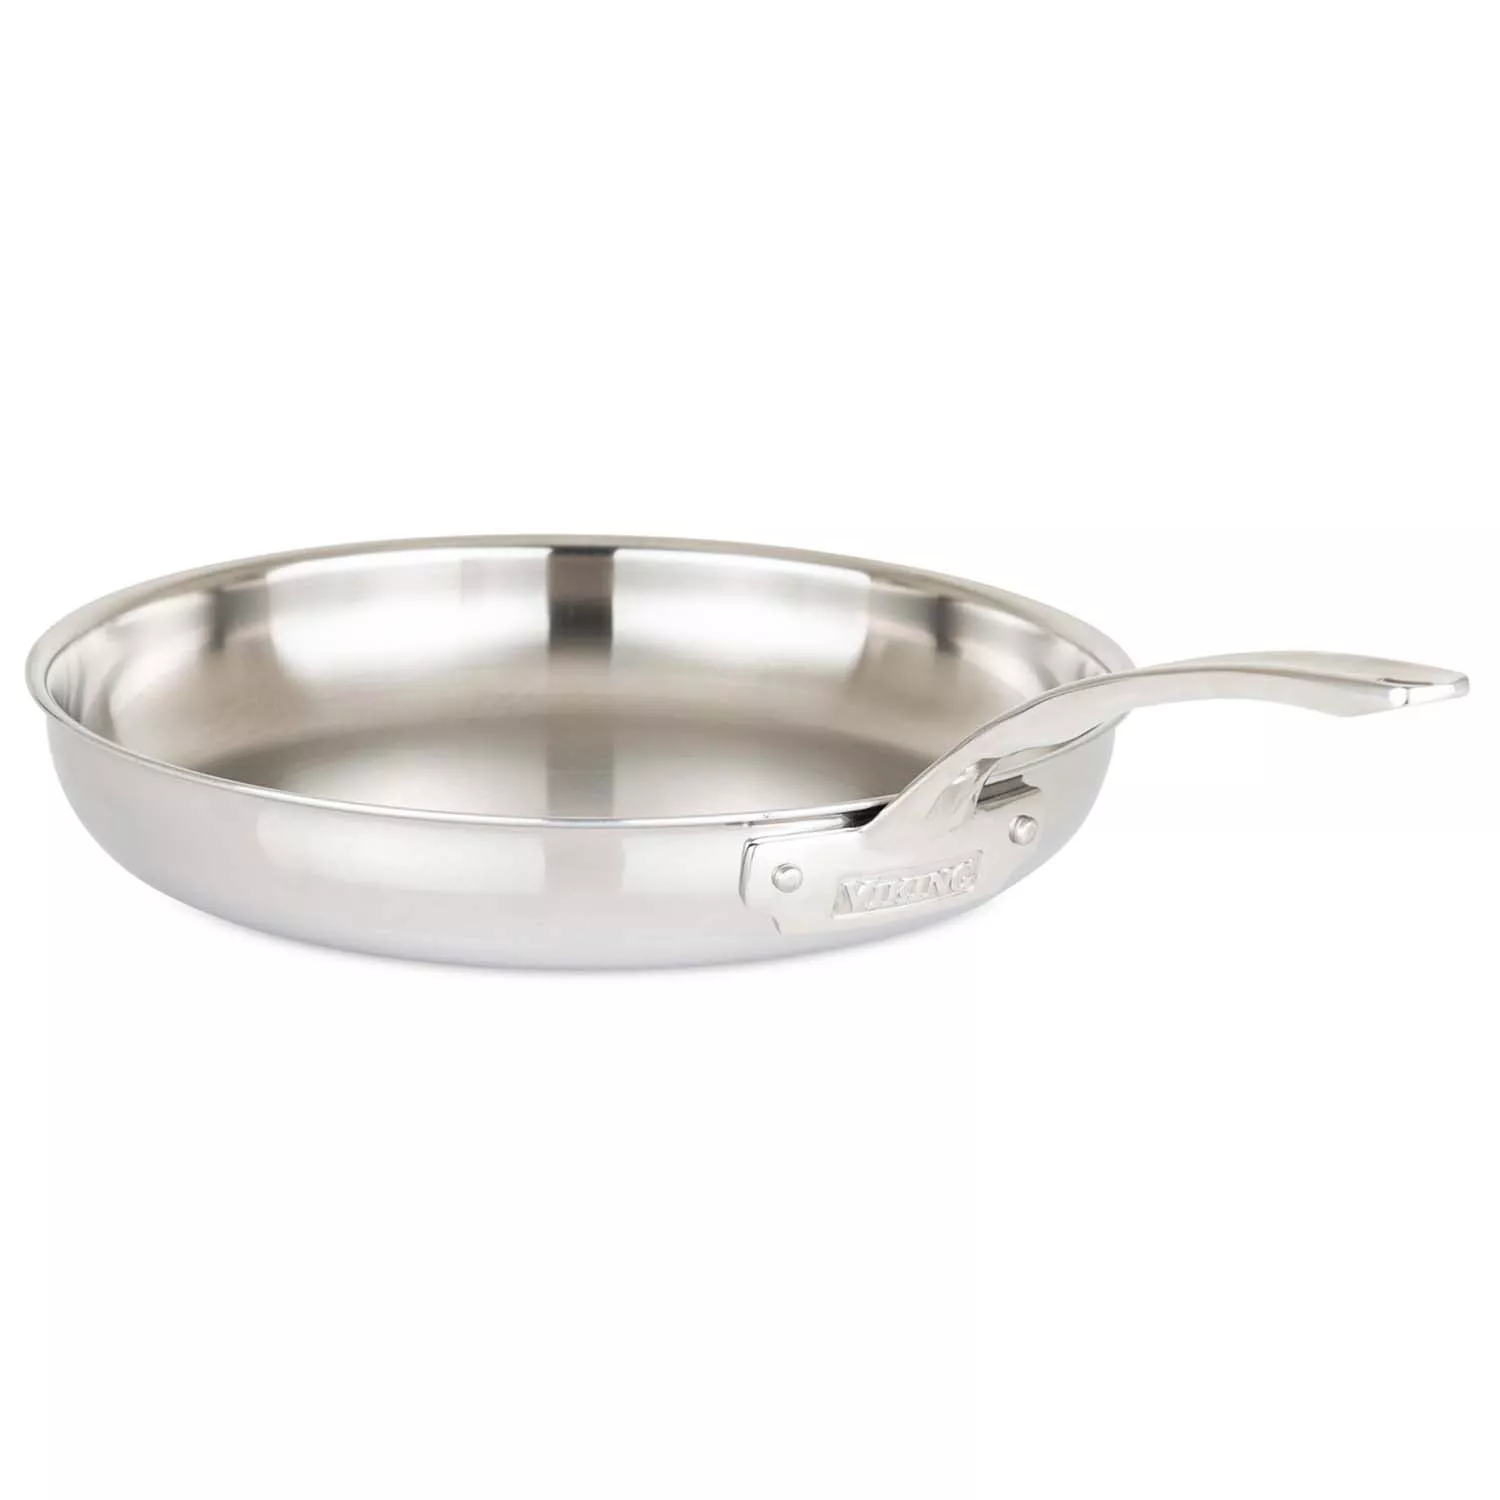 3-Piece Stainless Steel Frying Pan Set